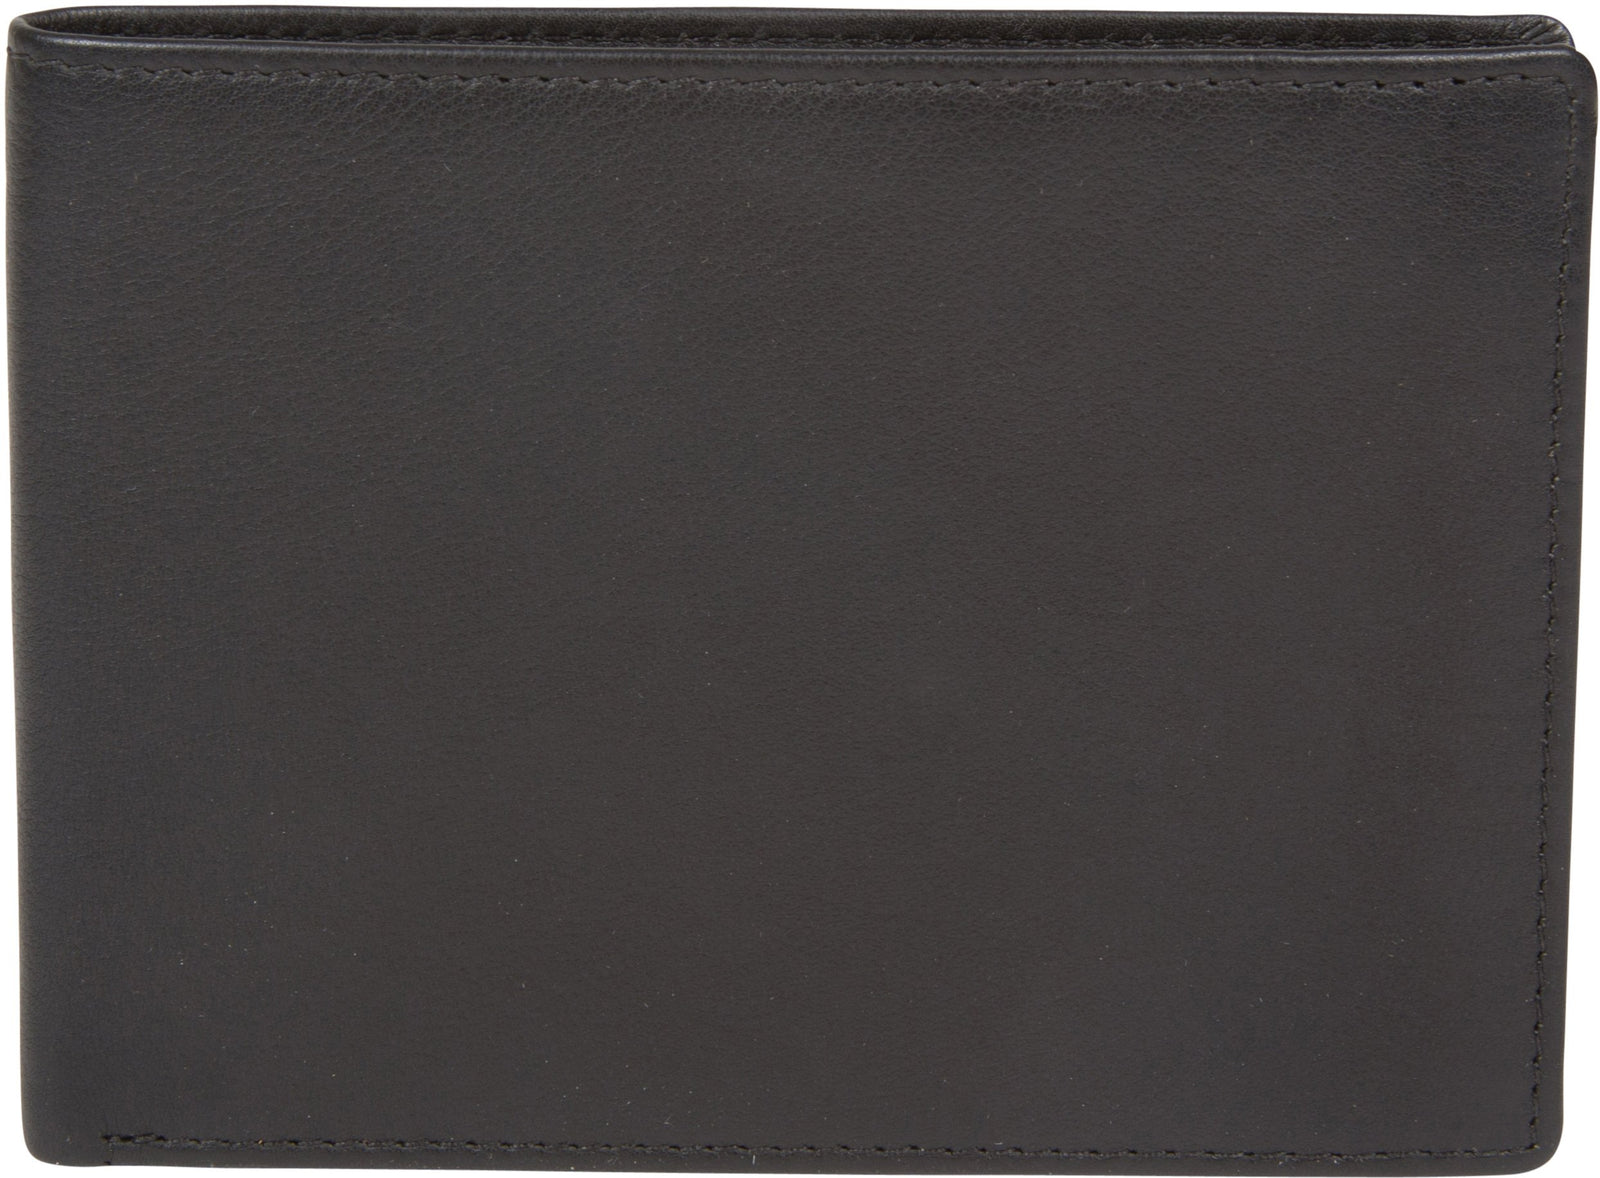 Sakkas Men's Bi-Fold Leather Wallet with Removable ID Case - Comes in